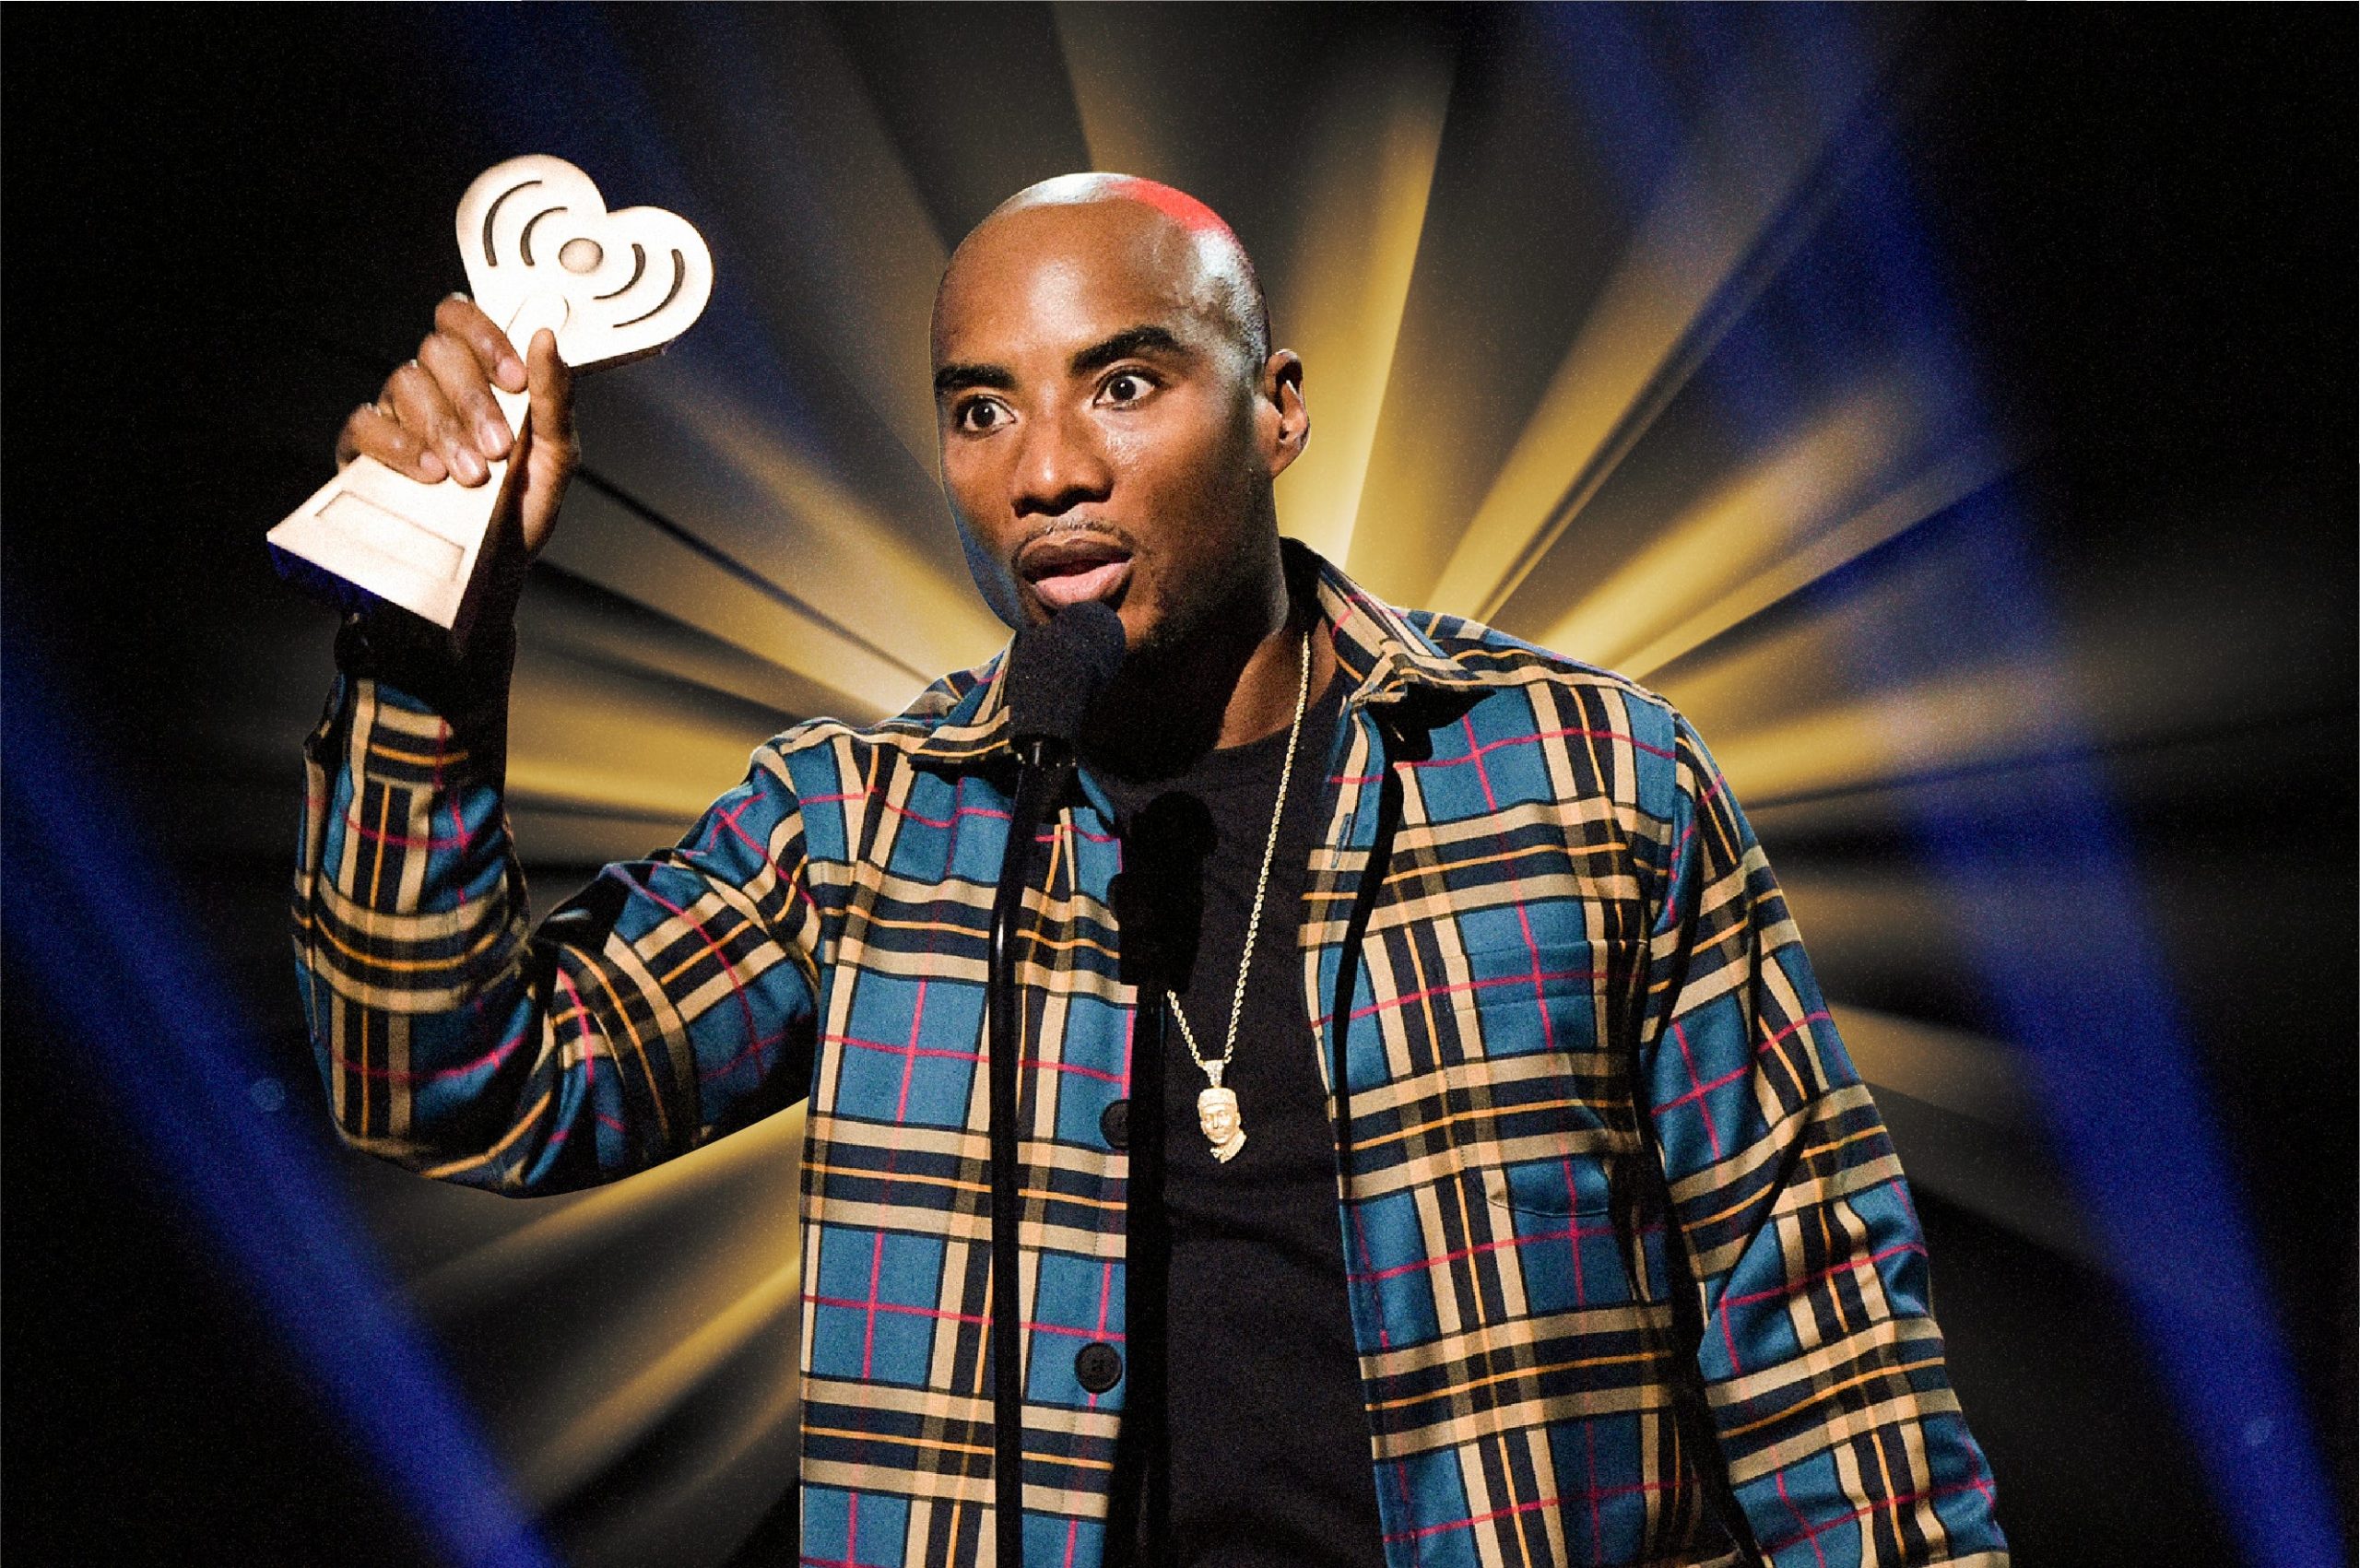 Charlamagne Tha God holding an award with a golden light radiating from behind him.